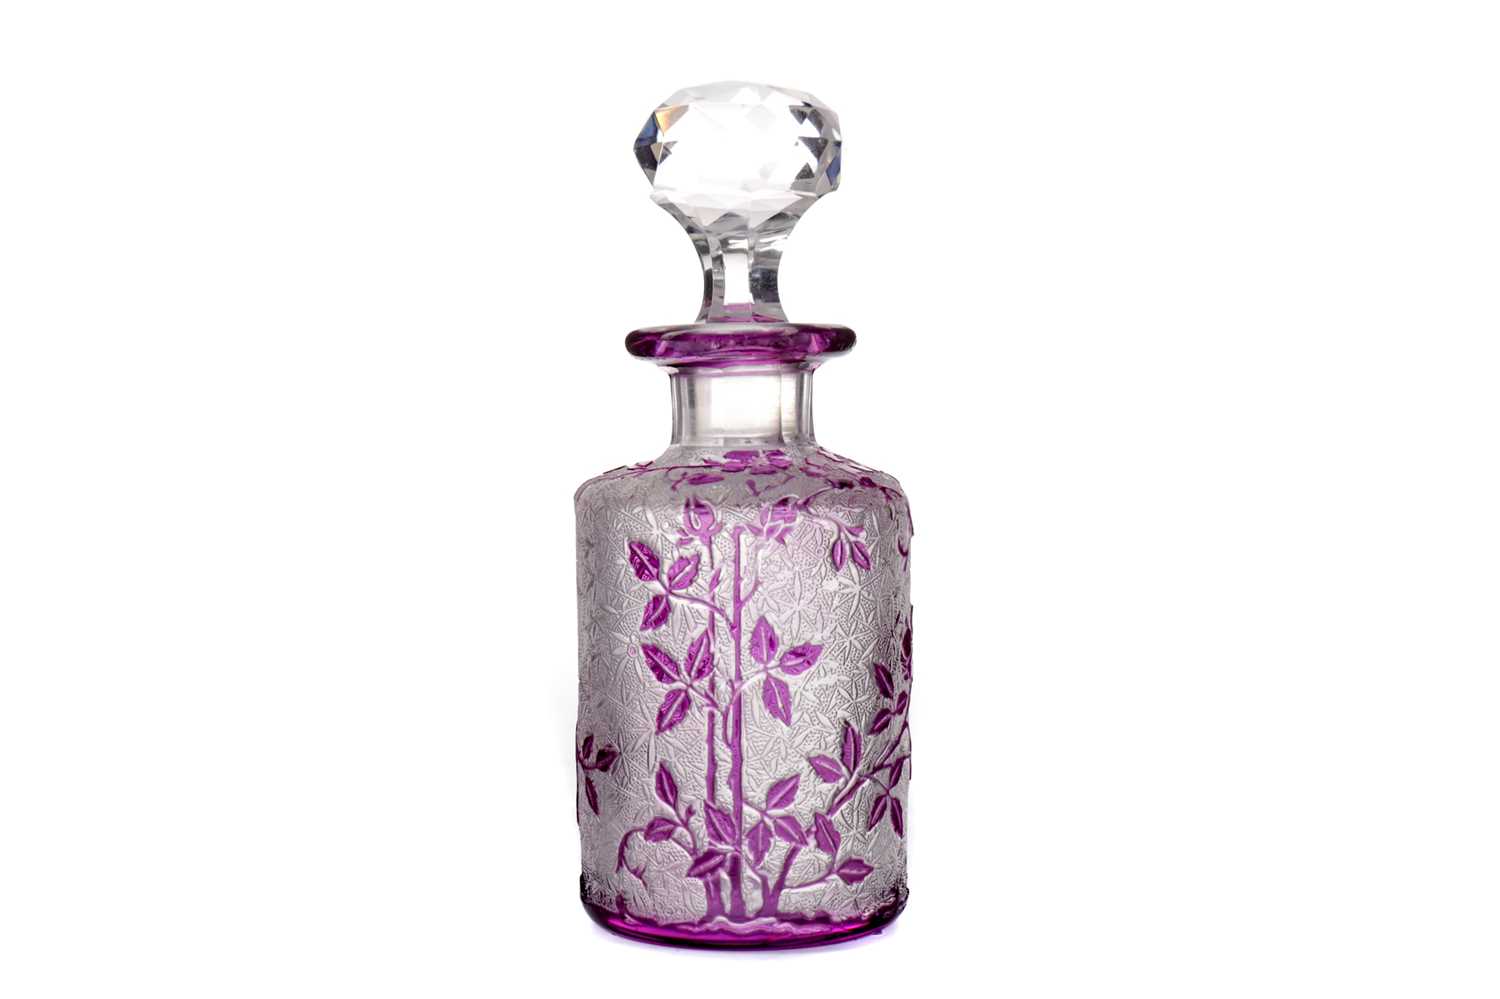 Lot 1143 - AN EARLY 20TH CENTURY BACCARAT CASED GLASS PERFUME BOTTLE AND STOPPER